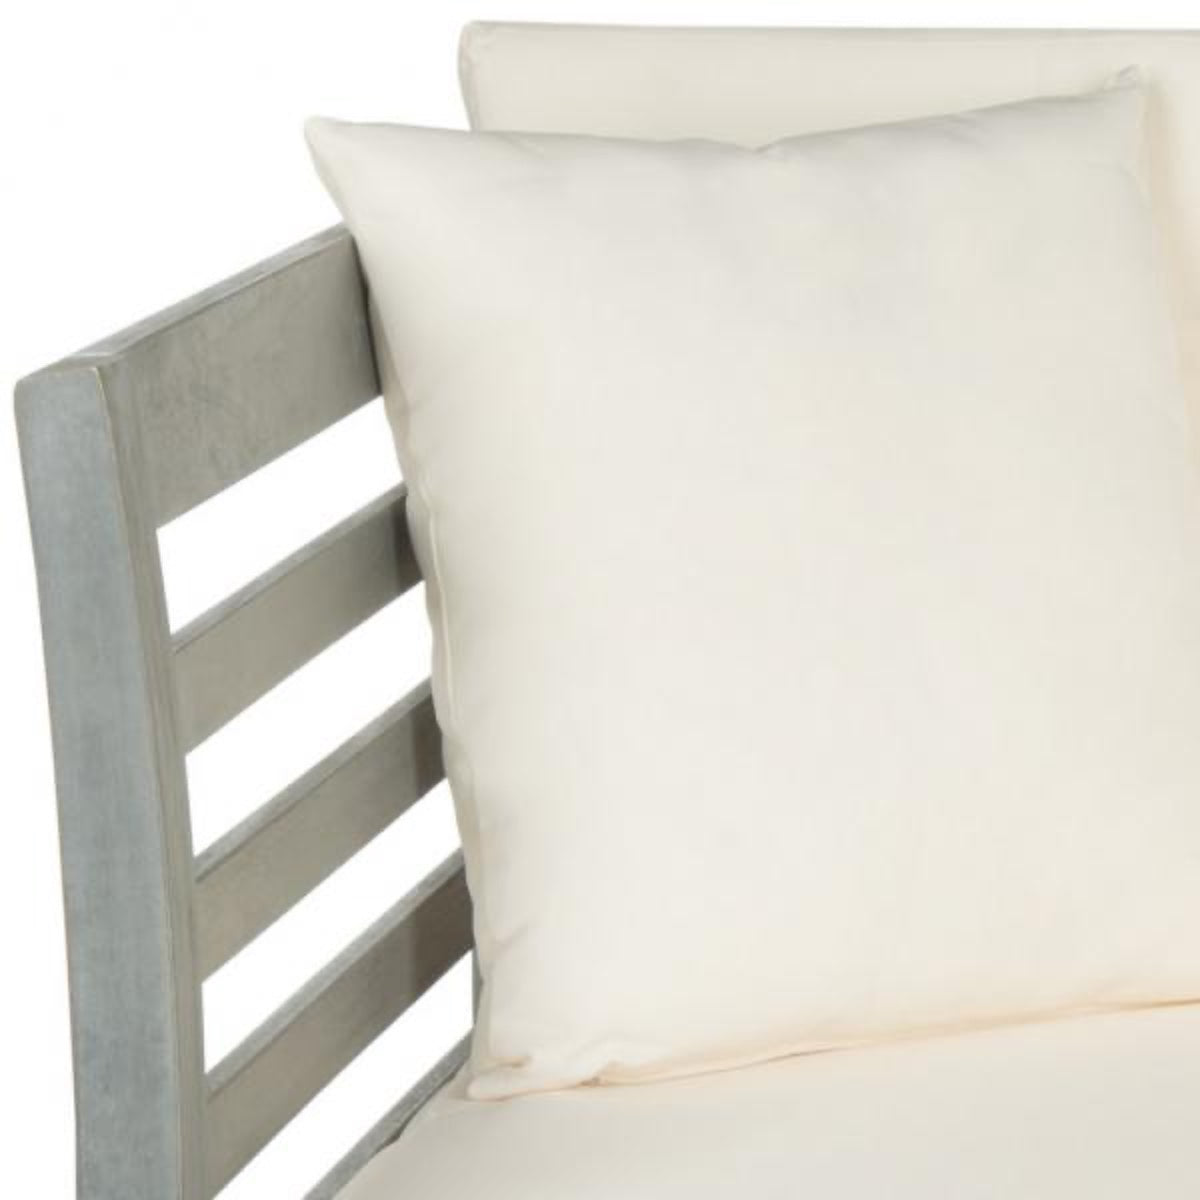 Lala Daybed - Grey